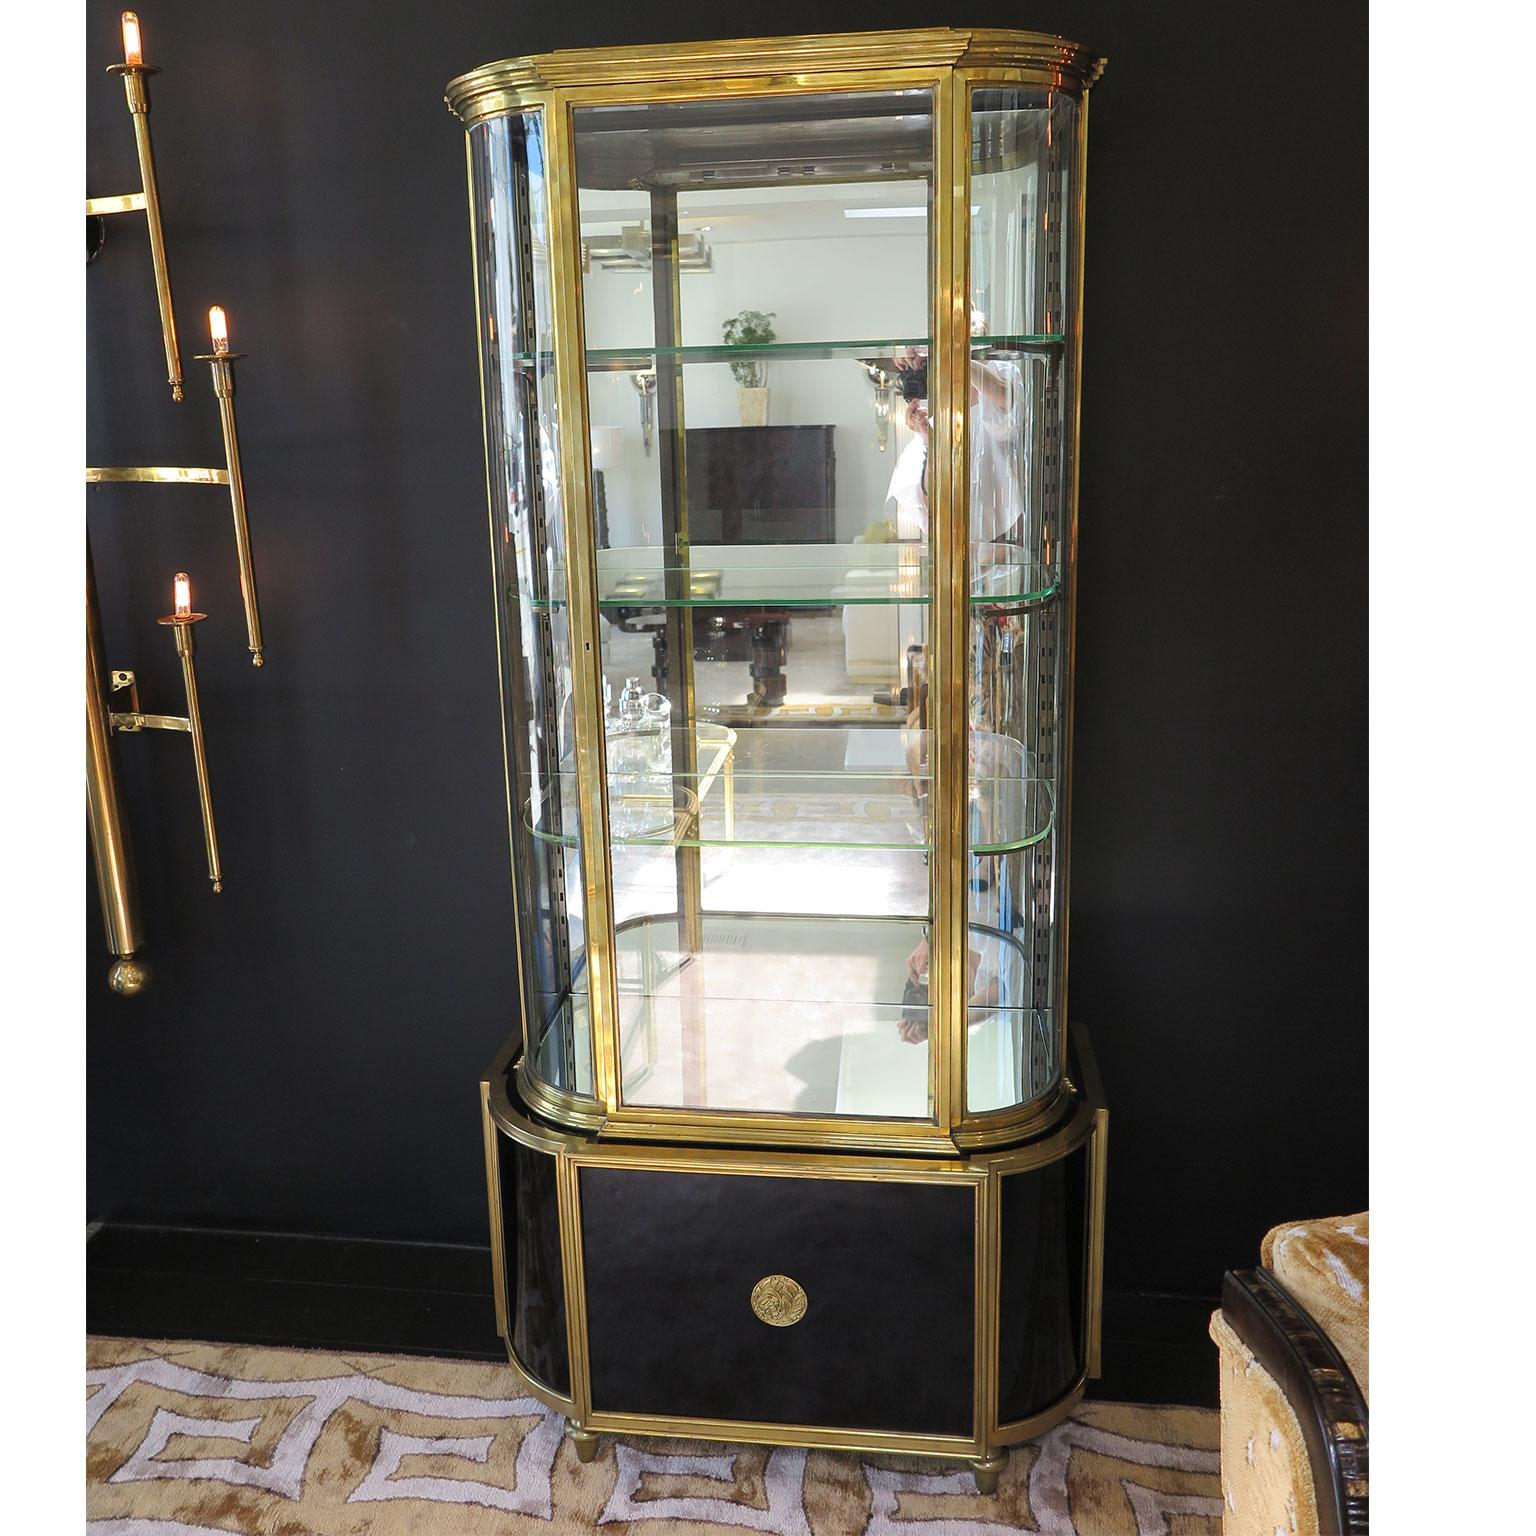 This tall and stately Art Deco brass display cabinet features a mirrored interior back and curved glass. Three adjustable interior glass shelves offer ample storage space for displaying collections. A concealed light bar illuminates the interior of